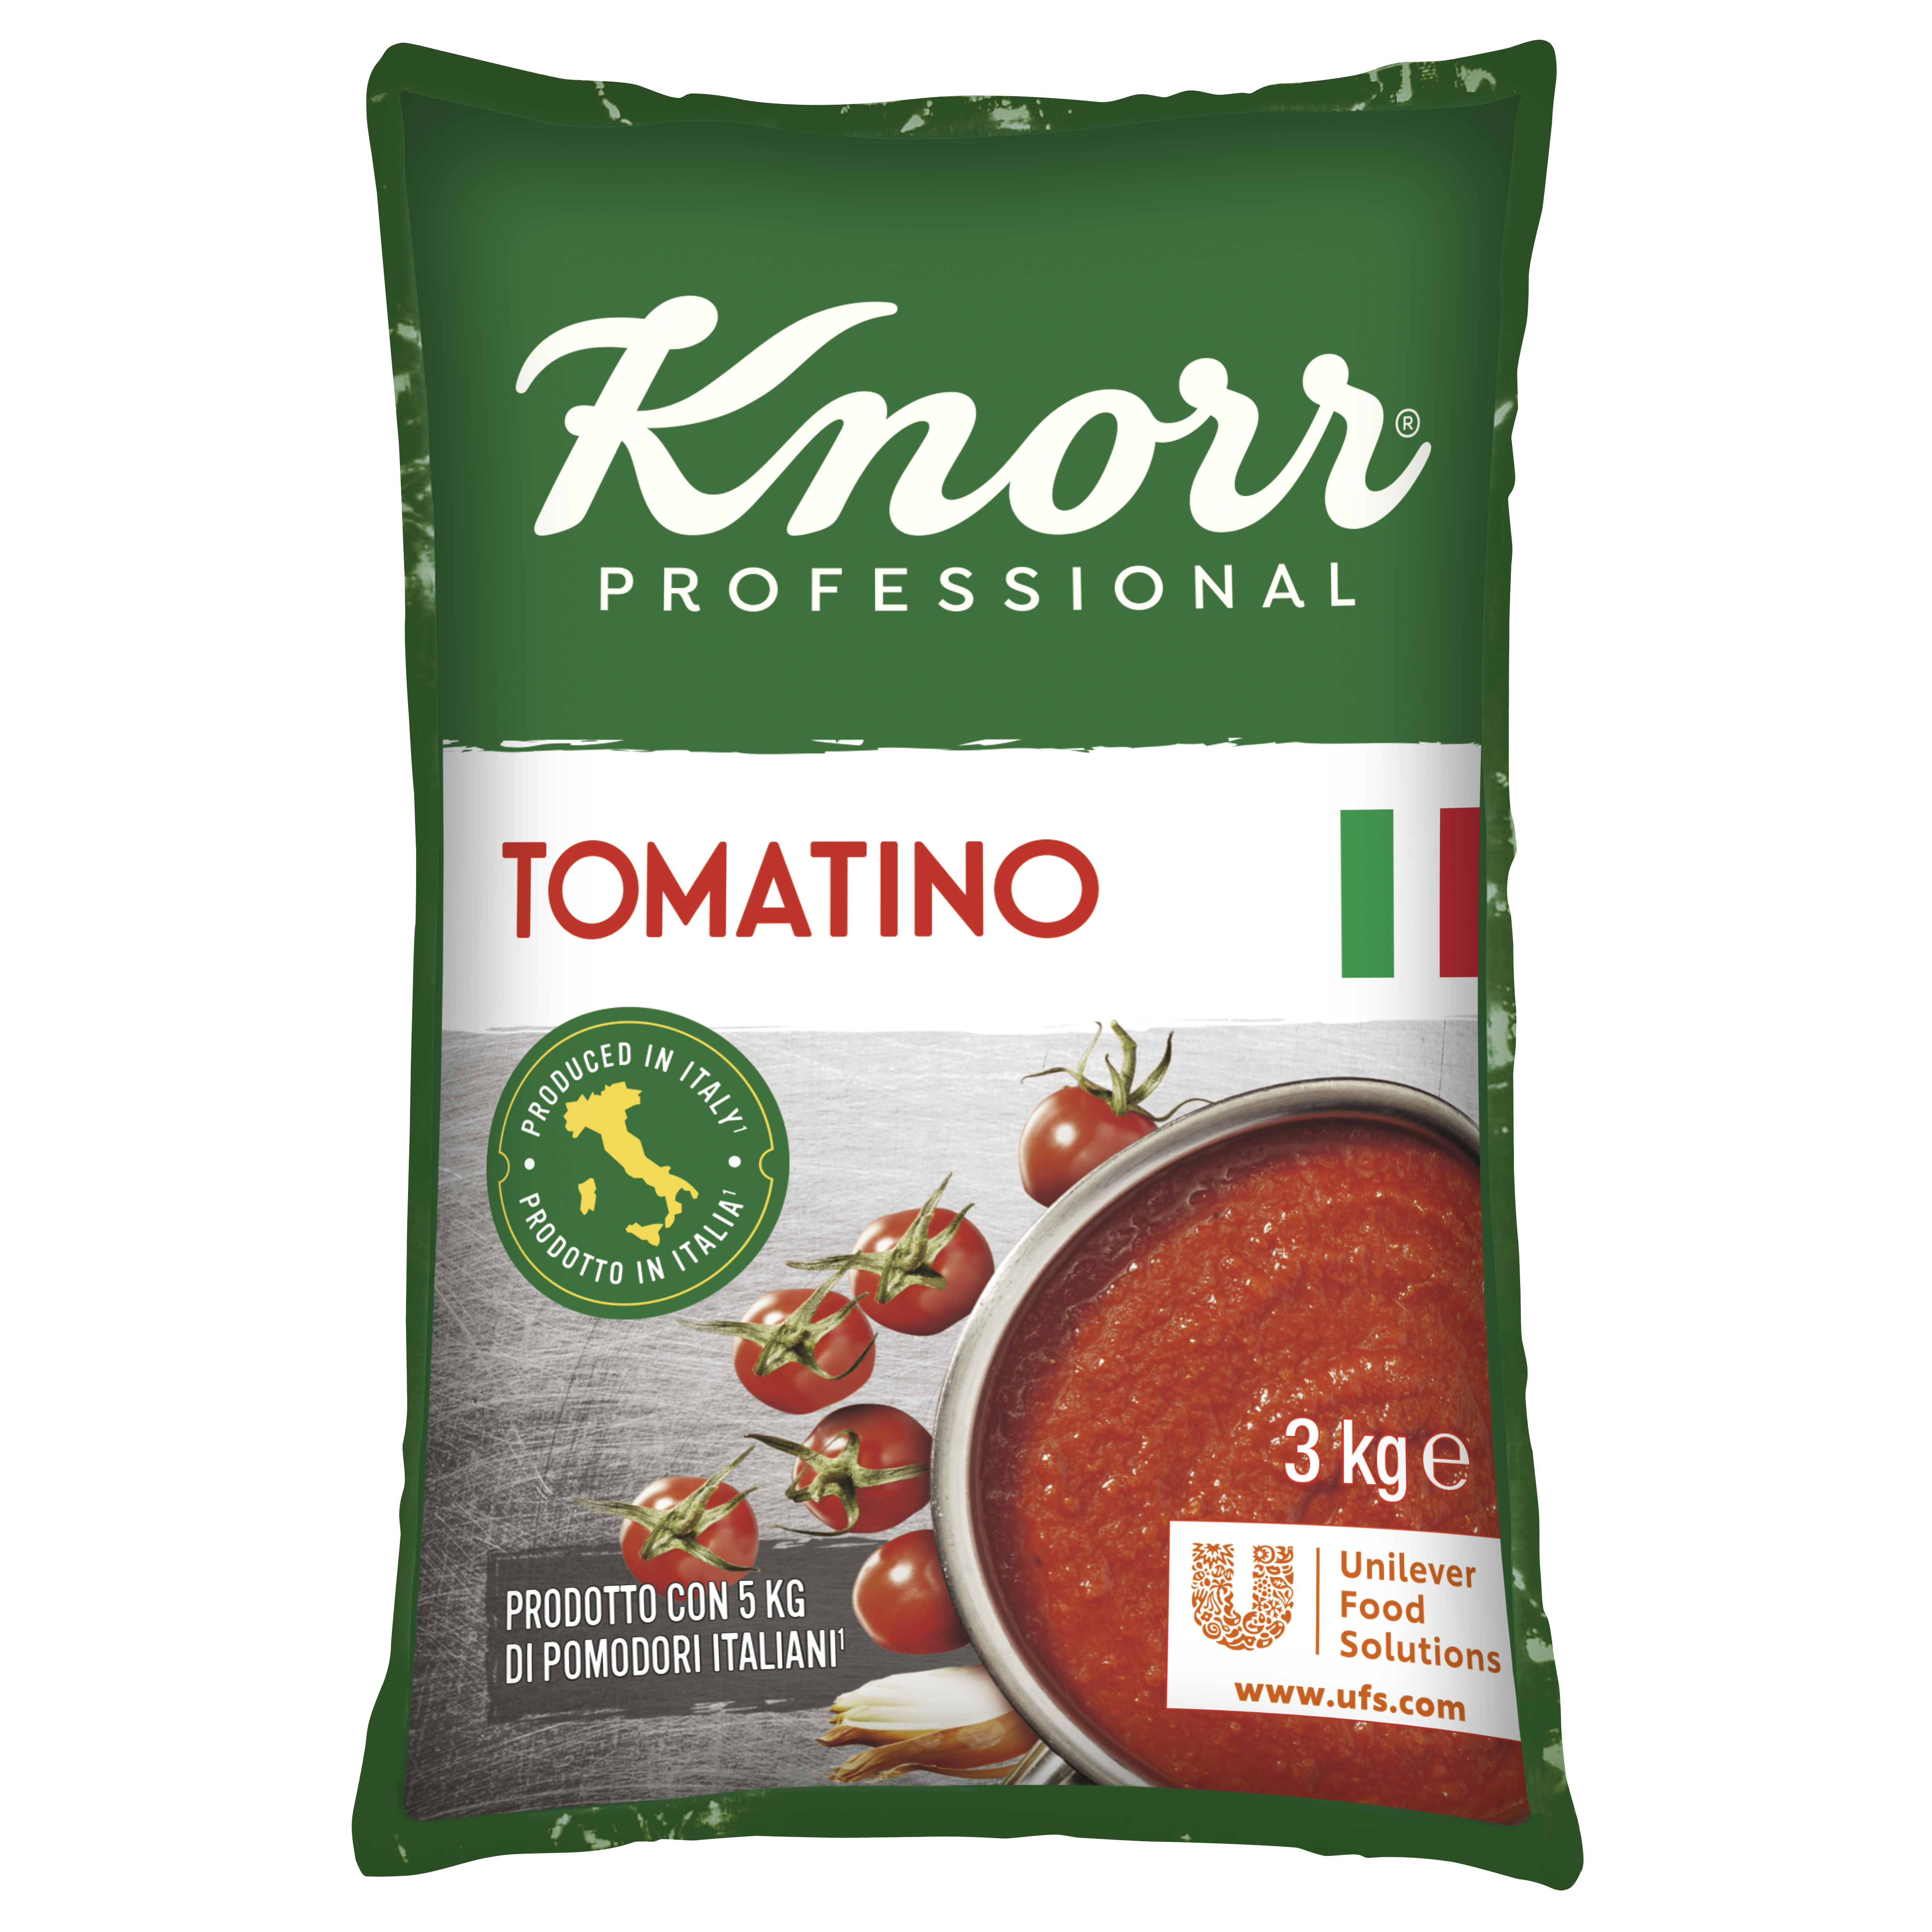 Knorr Tomatino 4 x 3 kg - 